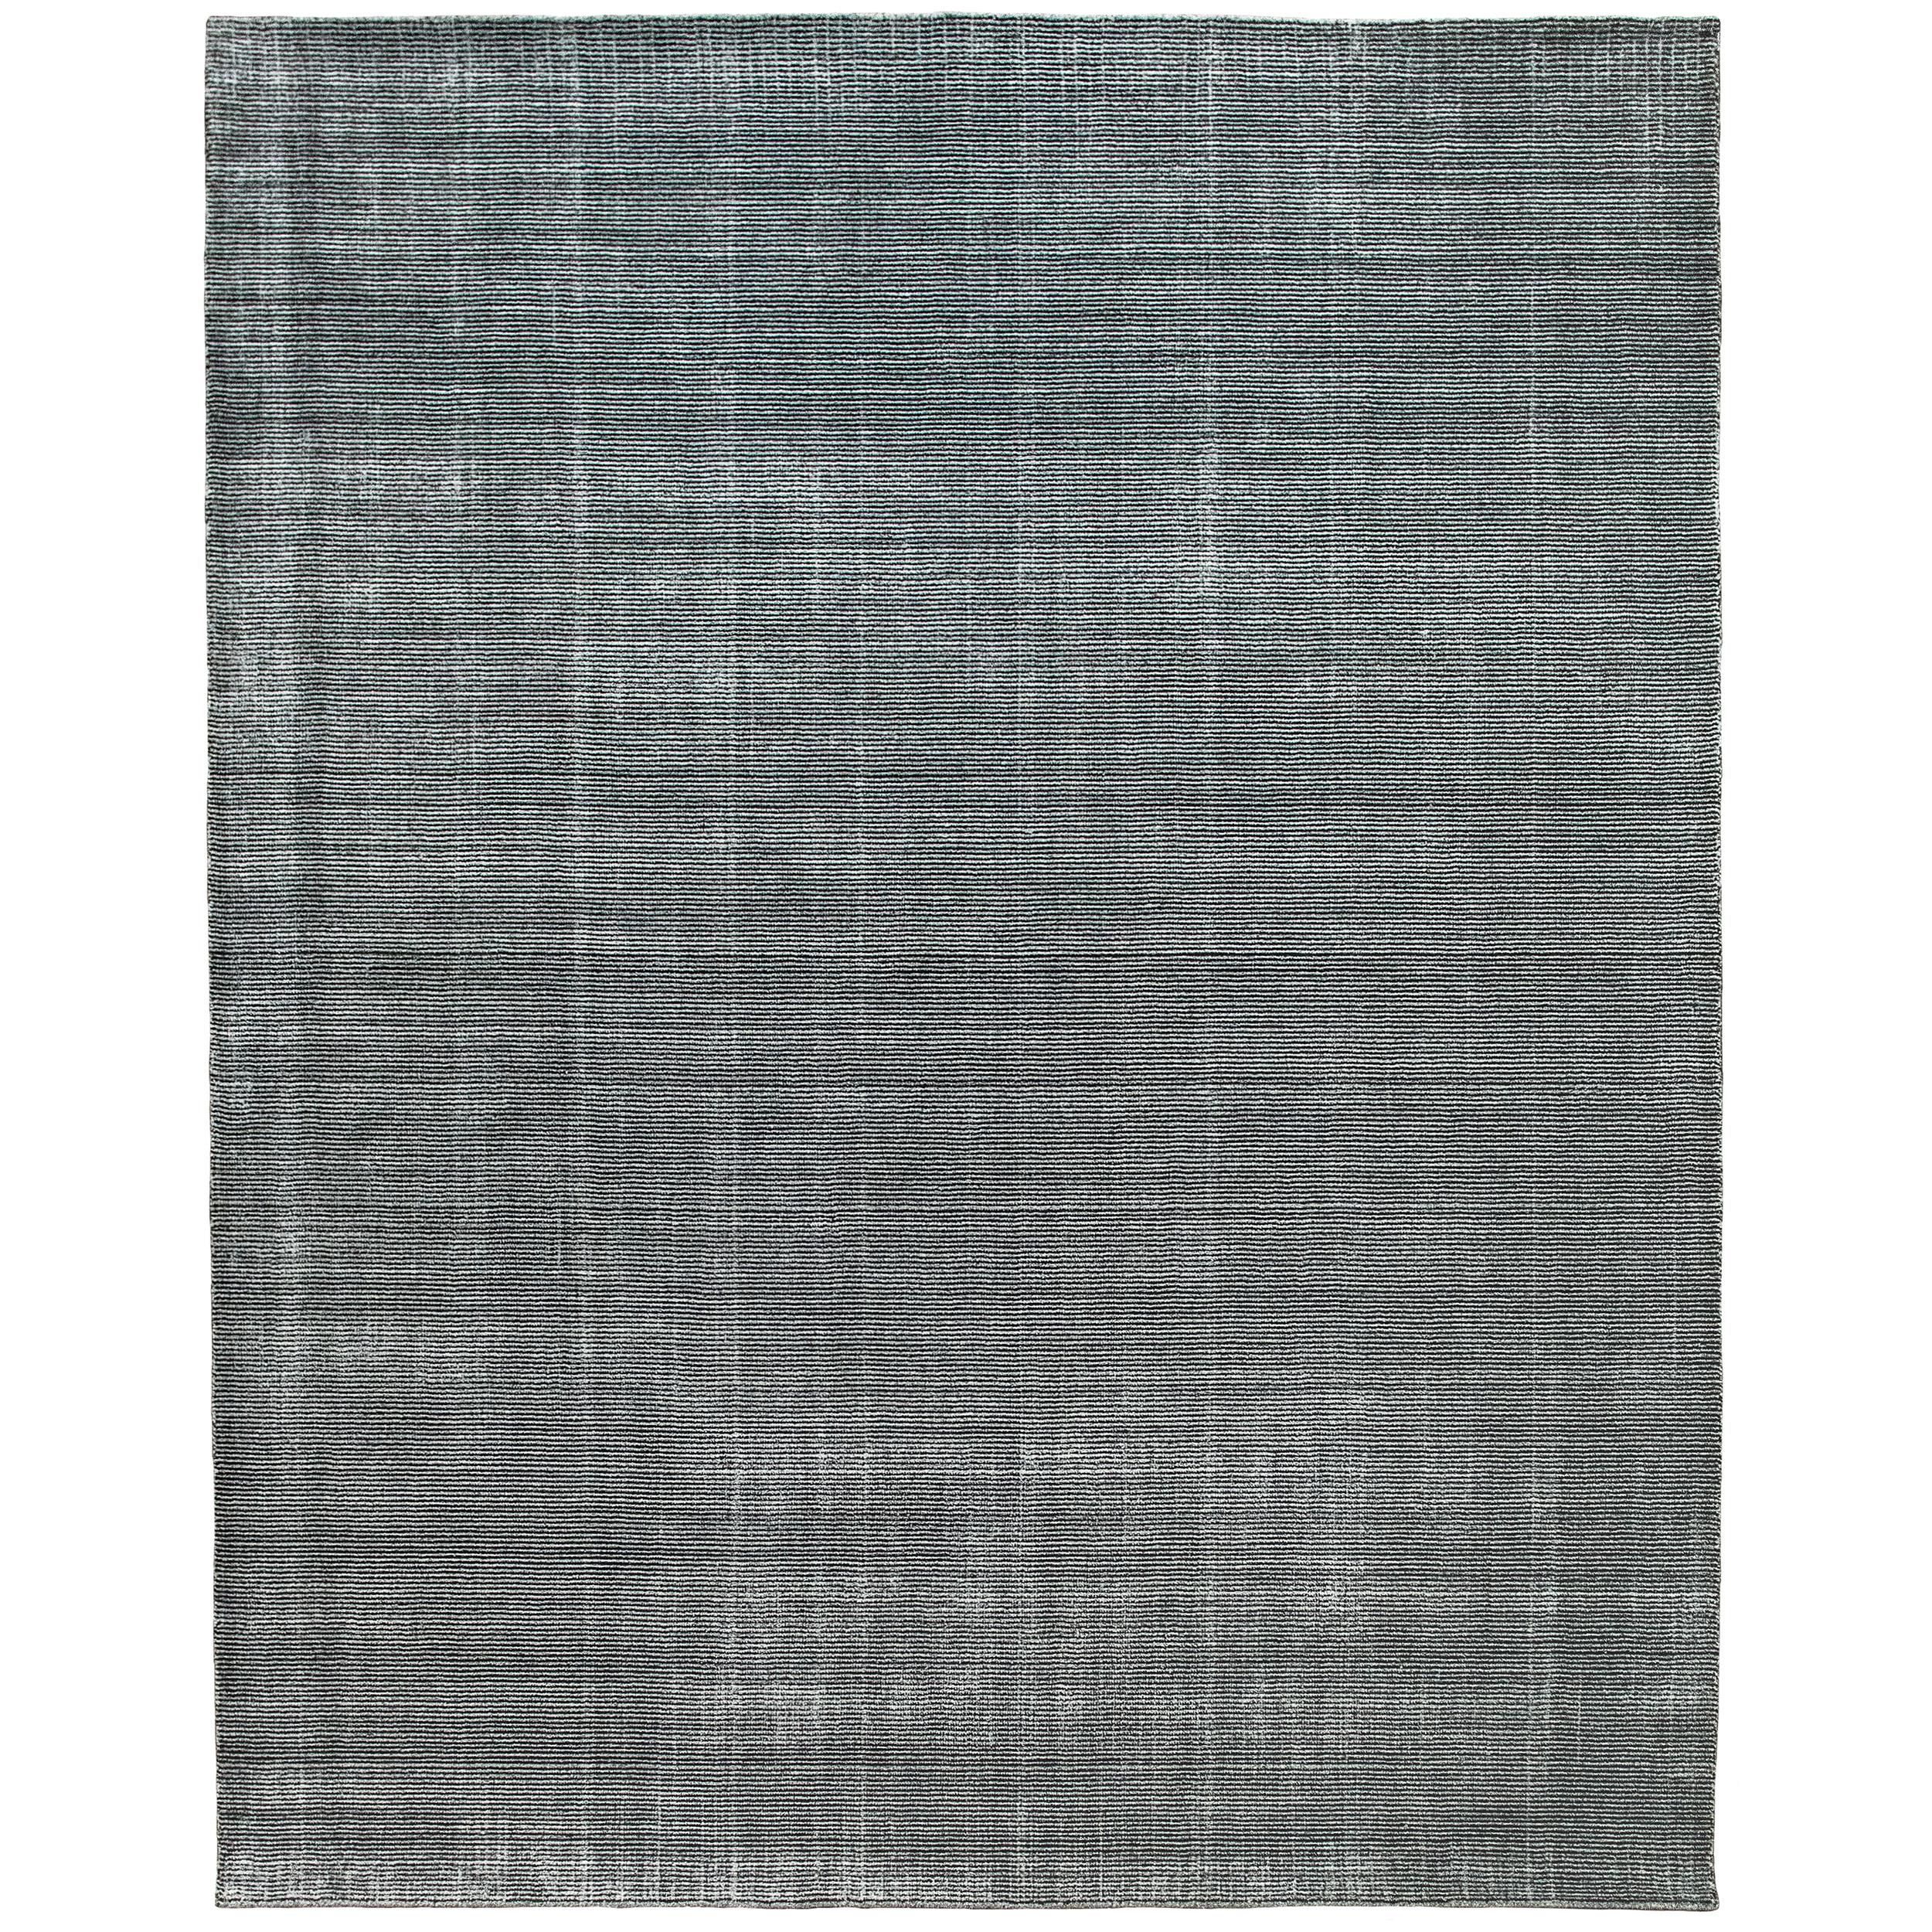 Luxury Modern Hand-Knotted Carbon Copy 12x15 Rug